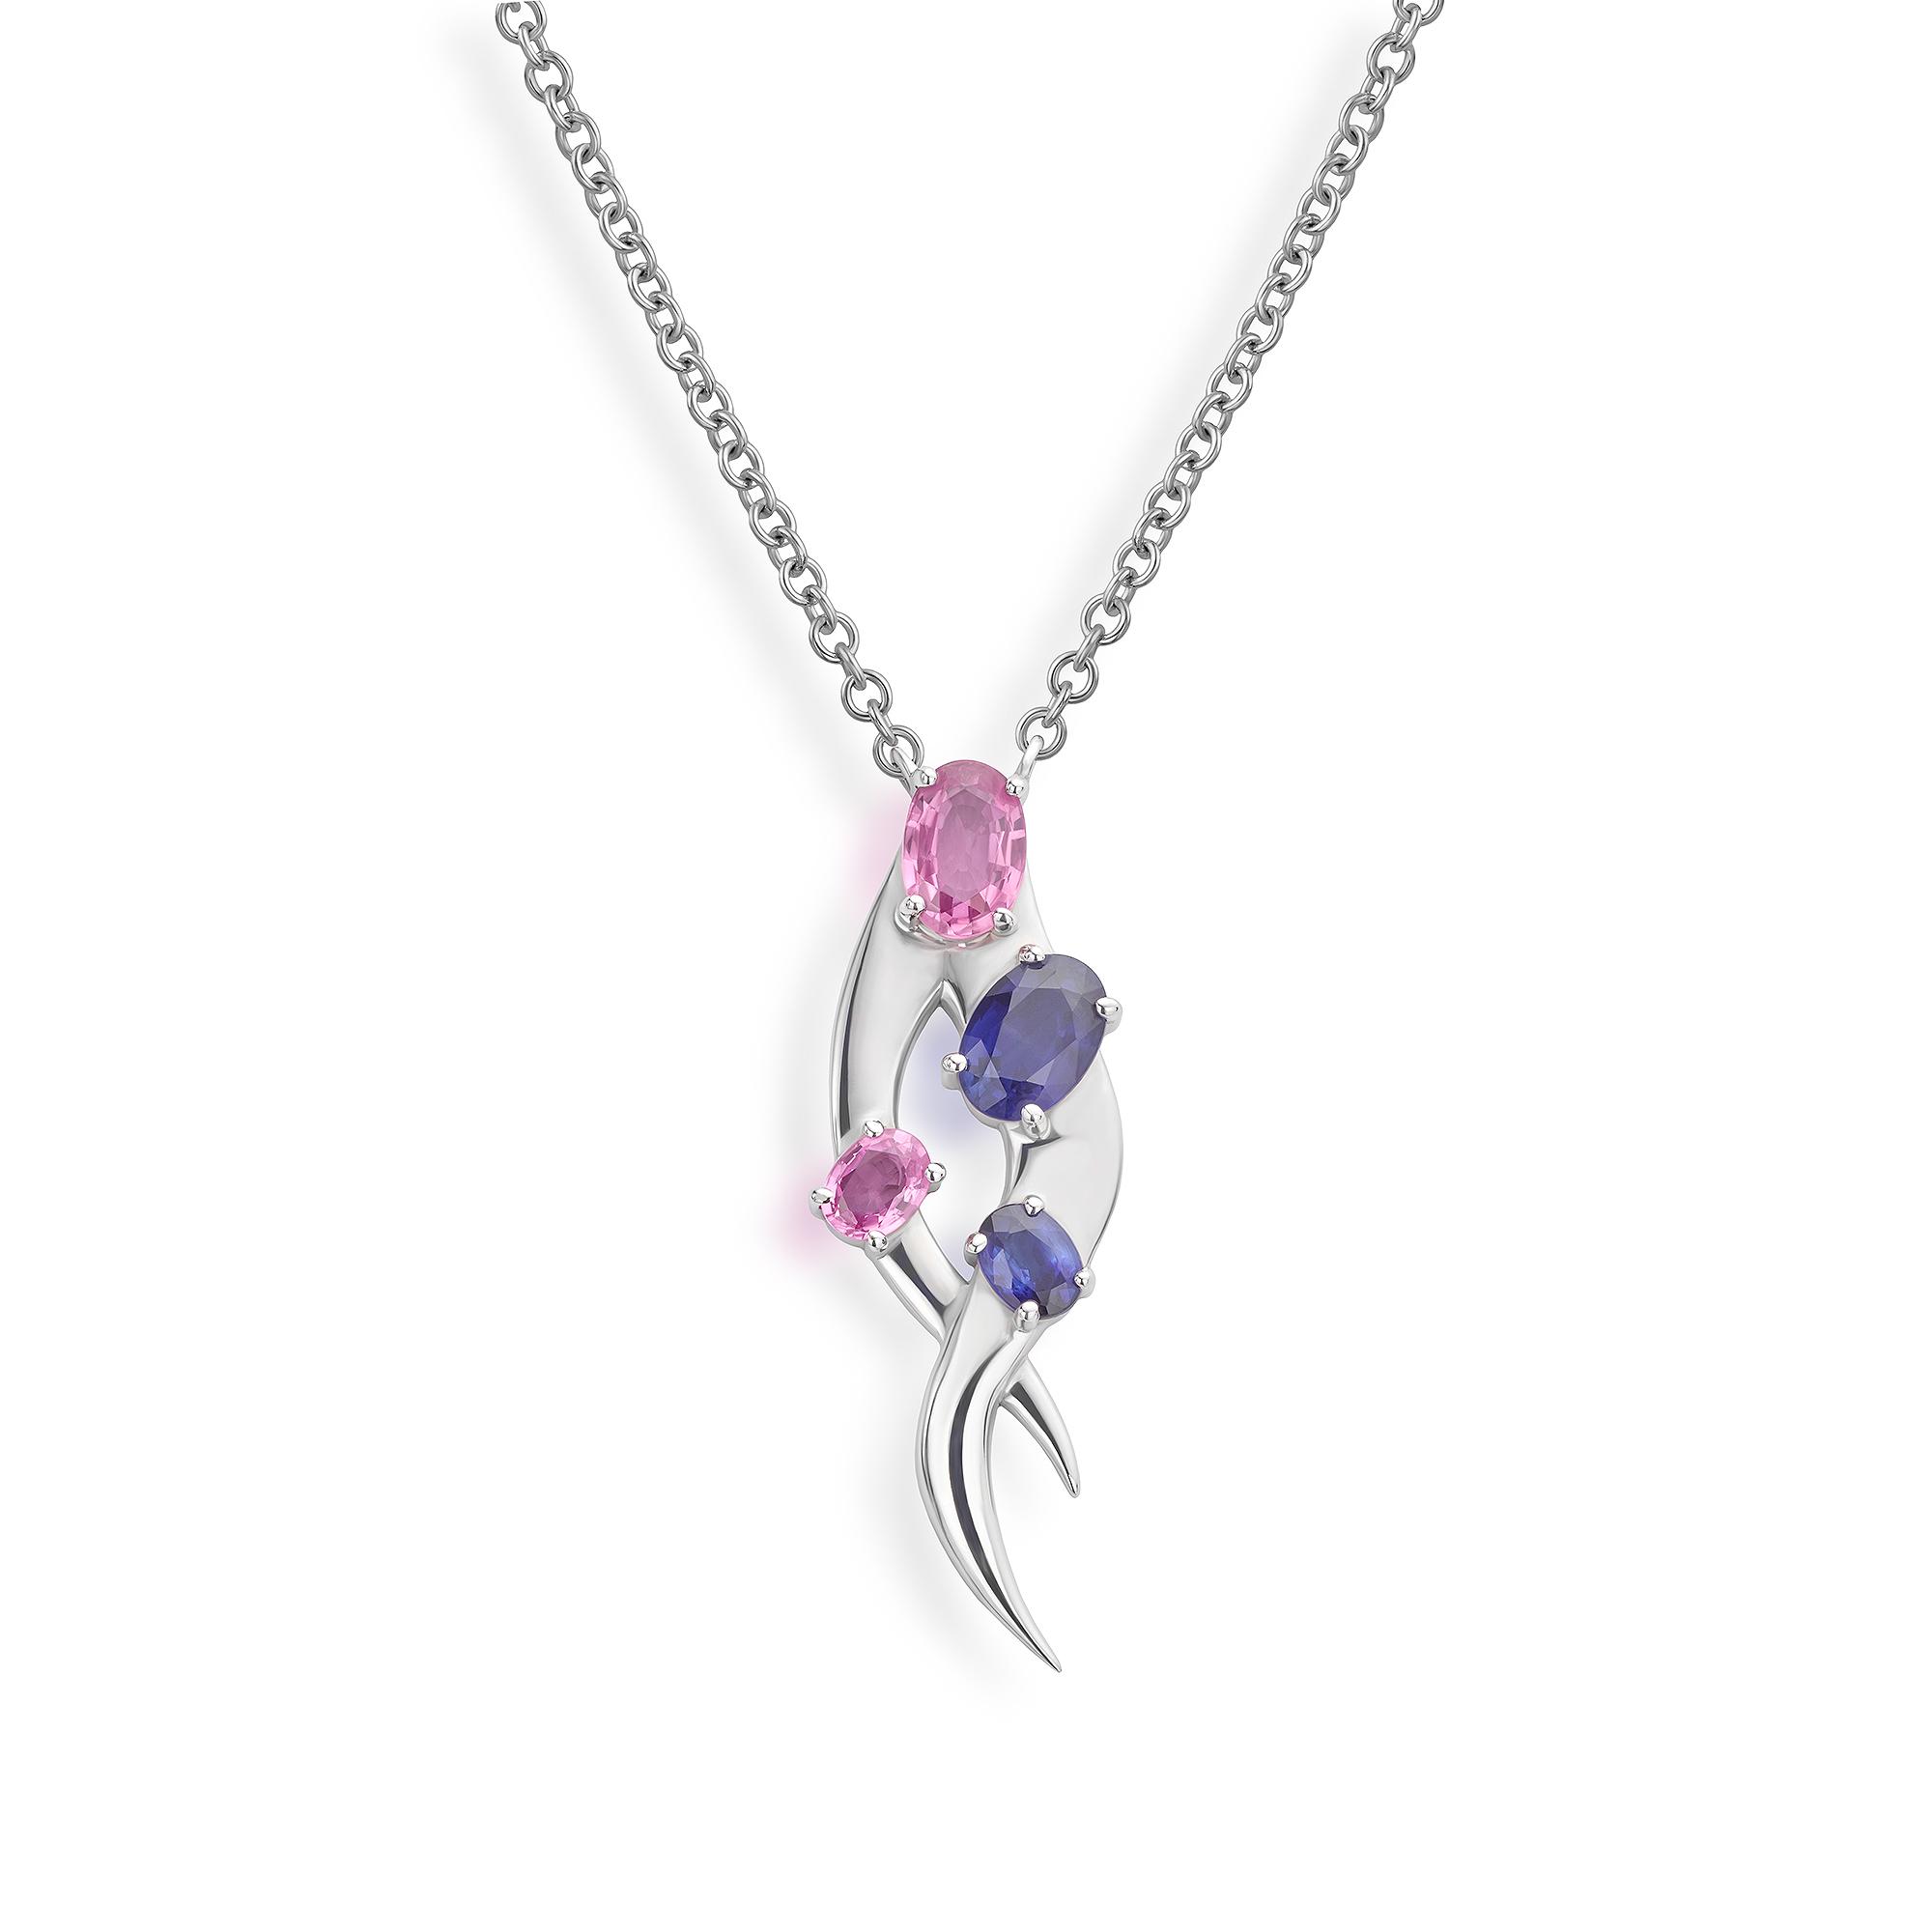 Pink and blue sapphire necklace Serendipity Diamonds Ryde 01983 567283